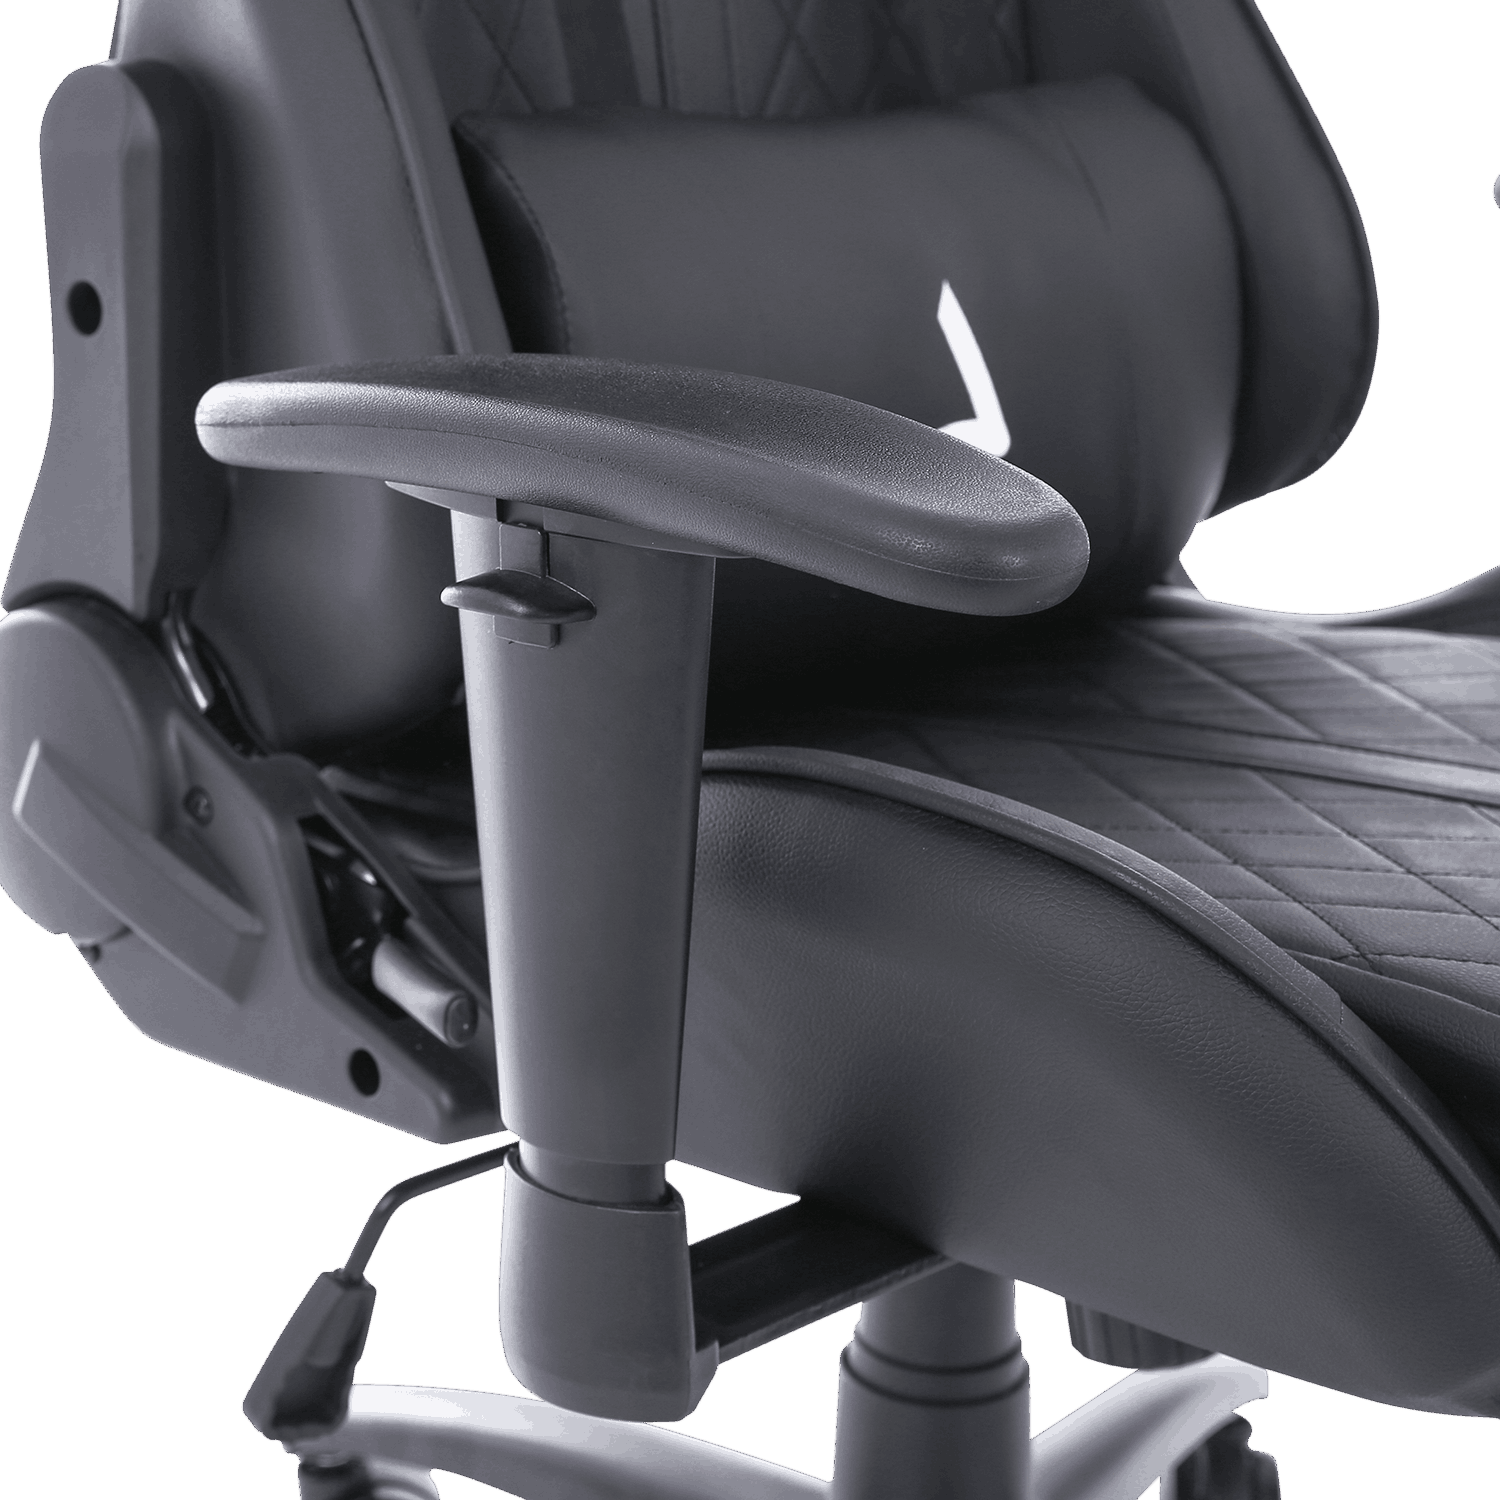 Chaise Gamer Serie Bronce Void Negro